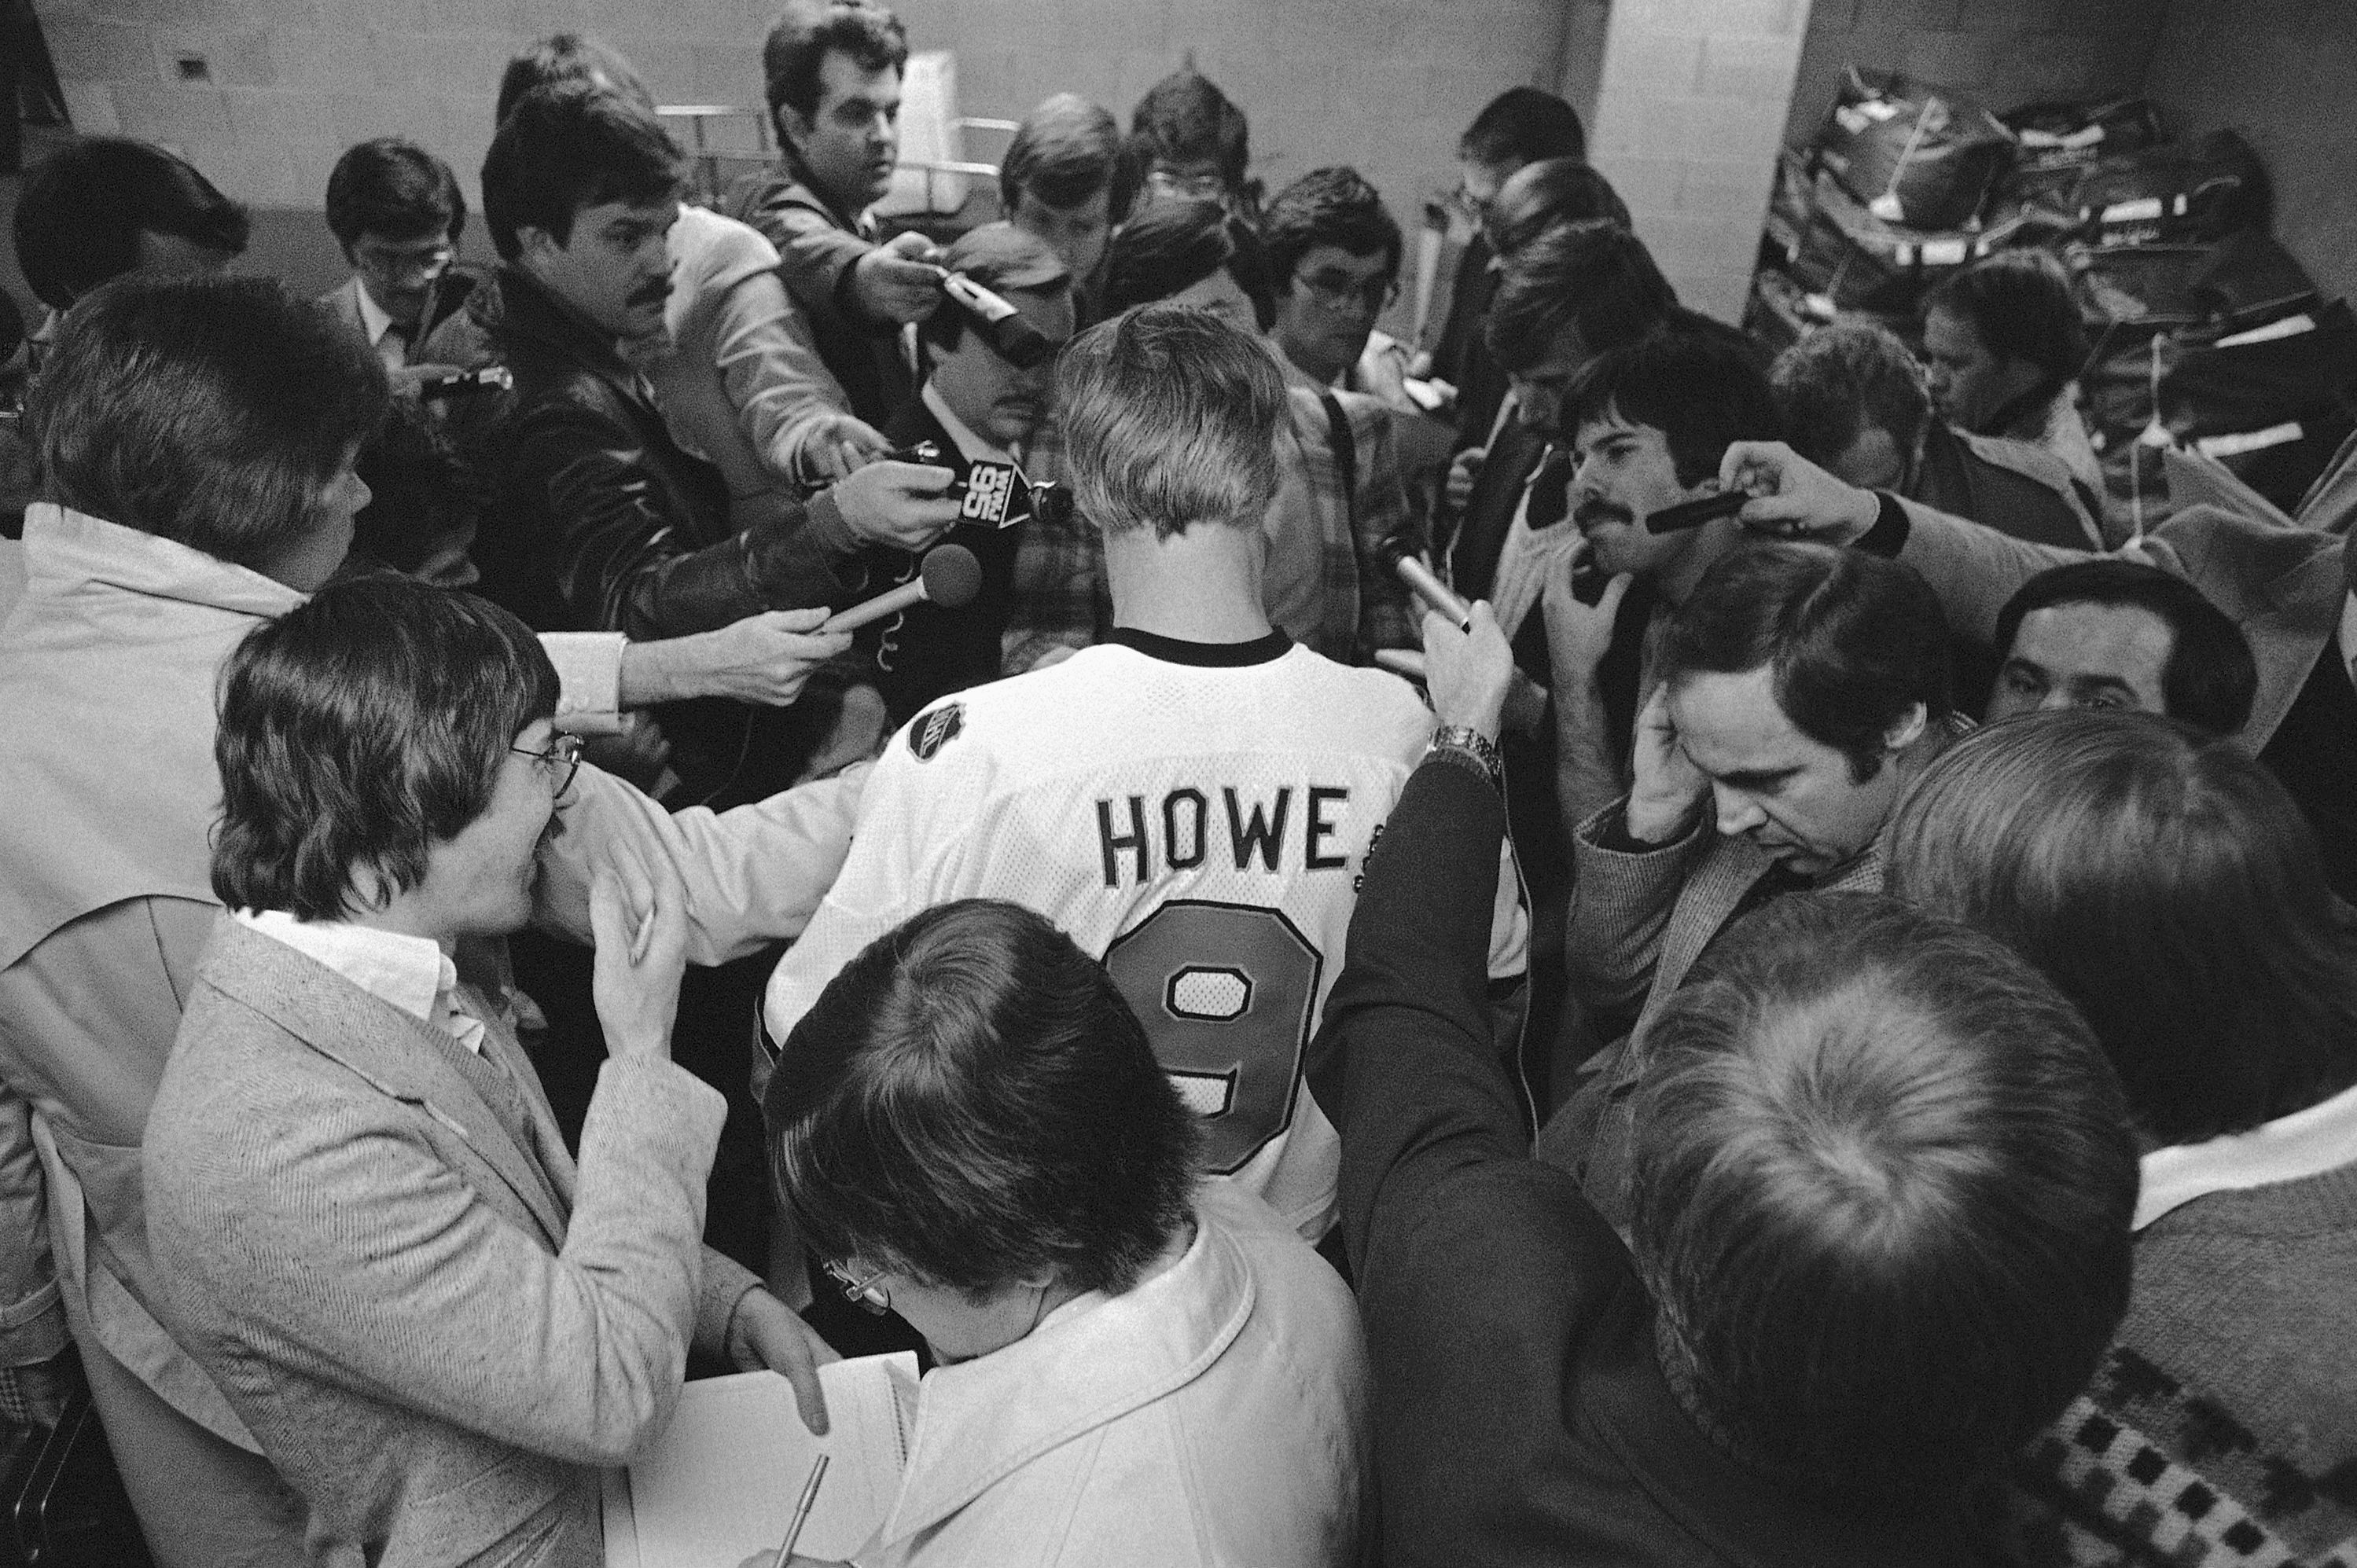 When Detroit fans welcomed Gordie Howe back for the 1980 All-Star